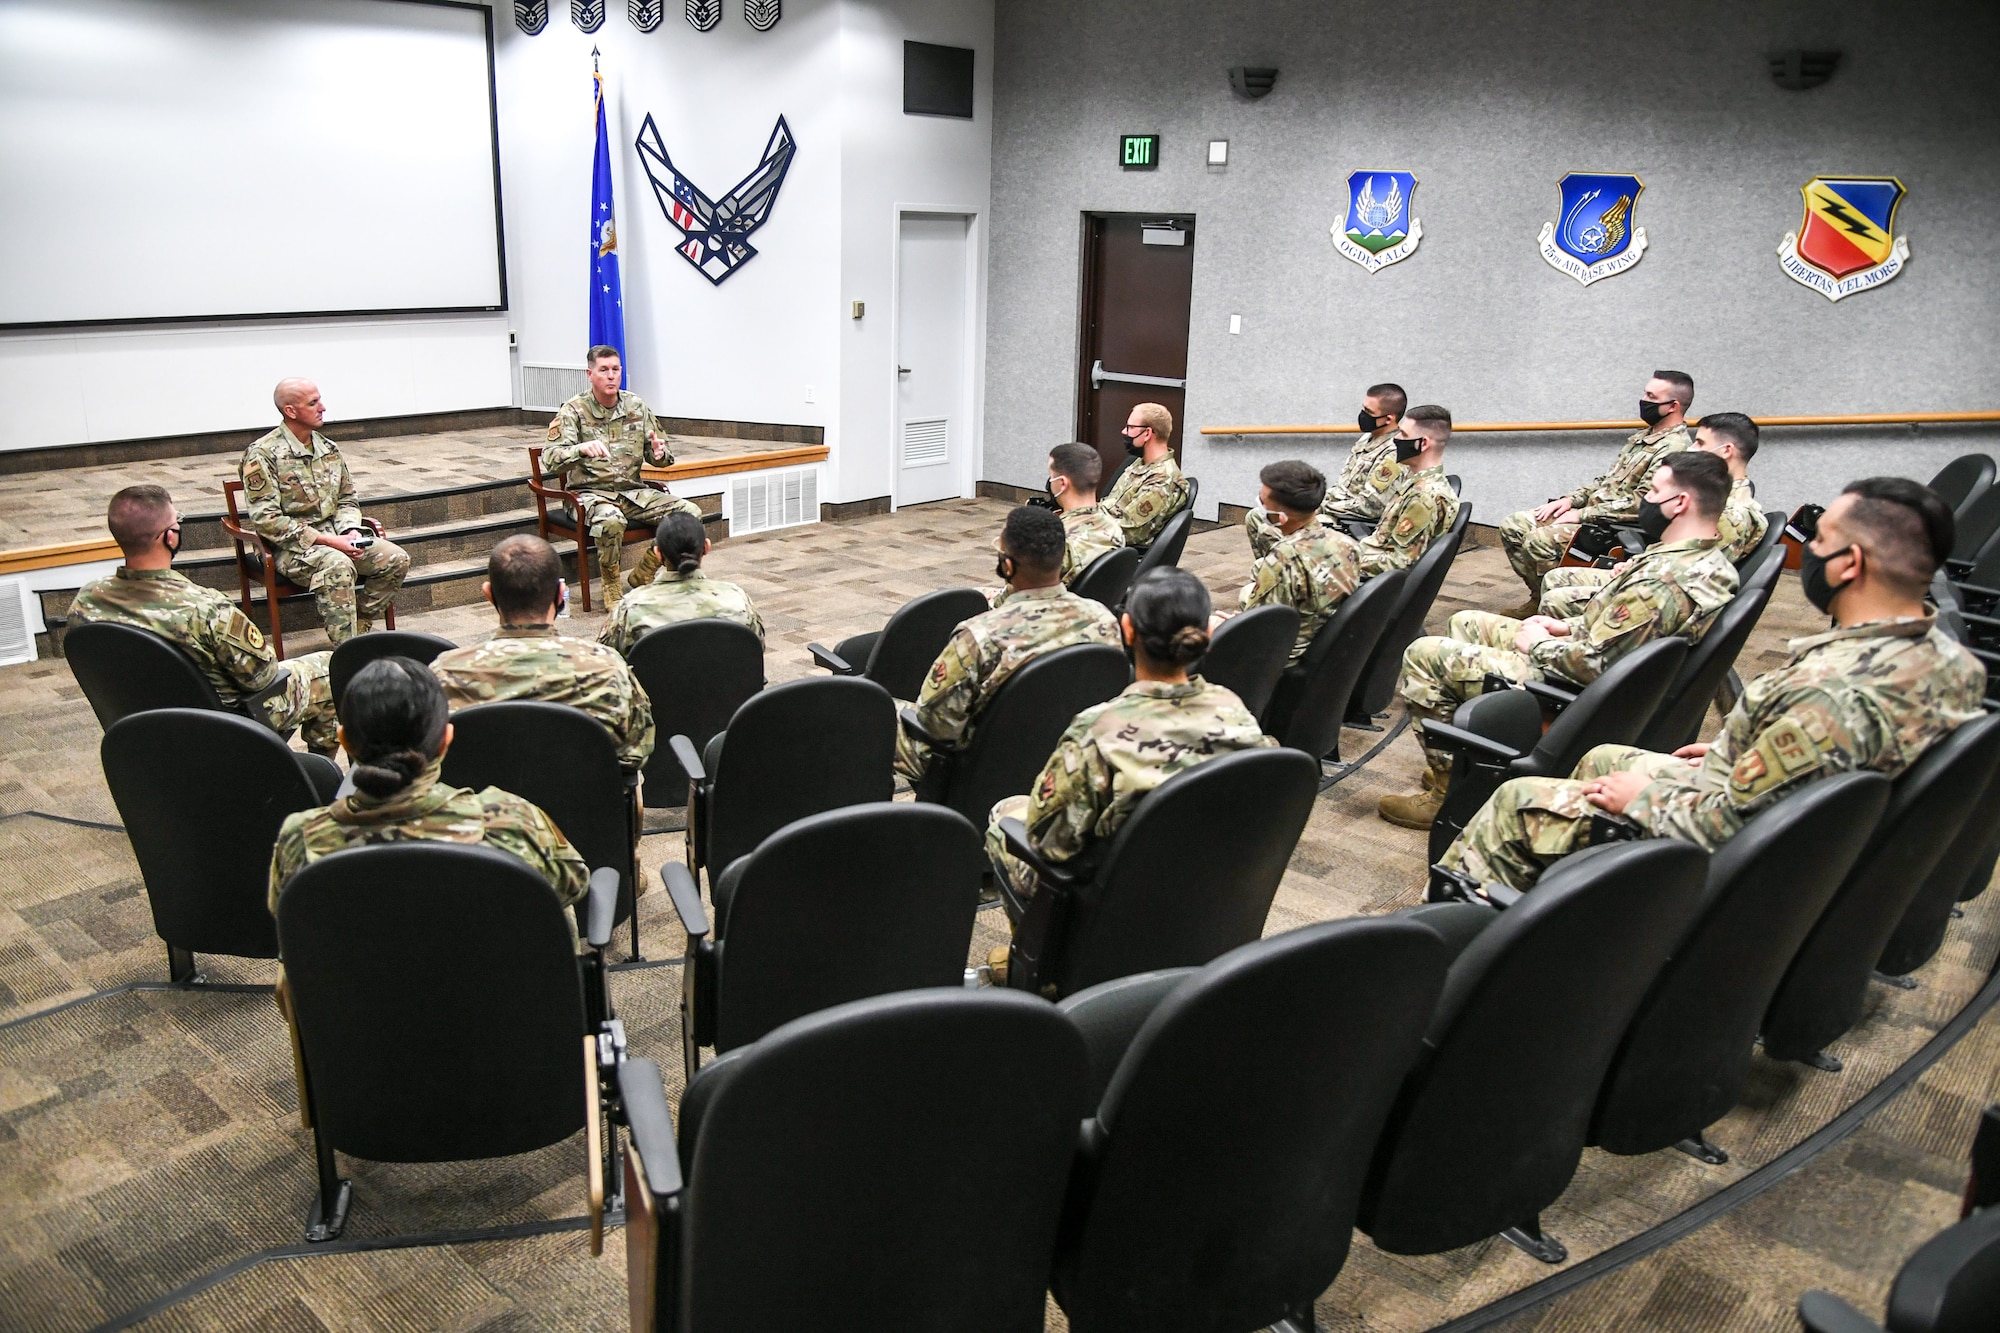 Airmen during Airman Leadership School seated and socially distanced in an auditorium.